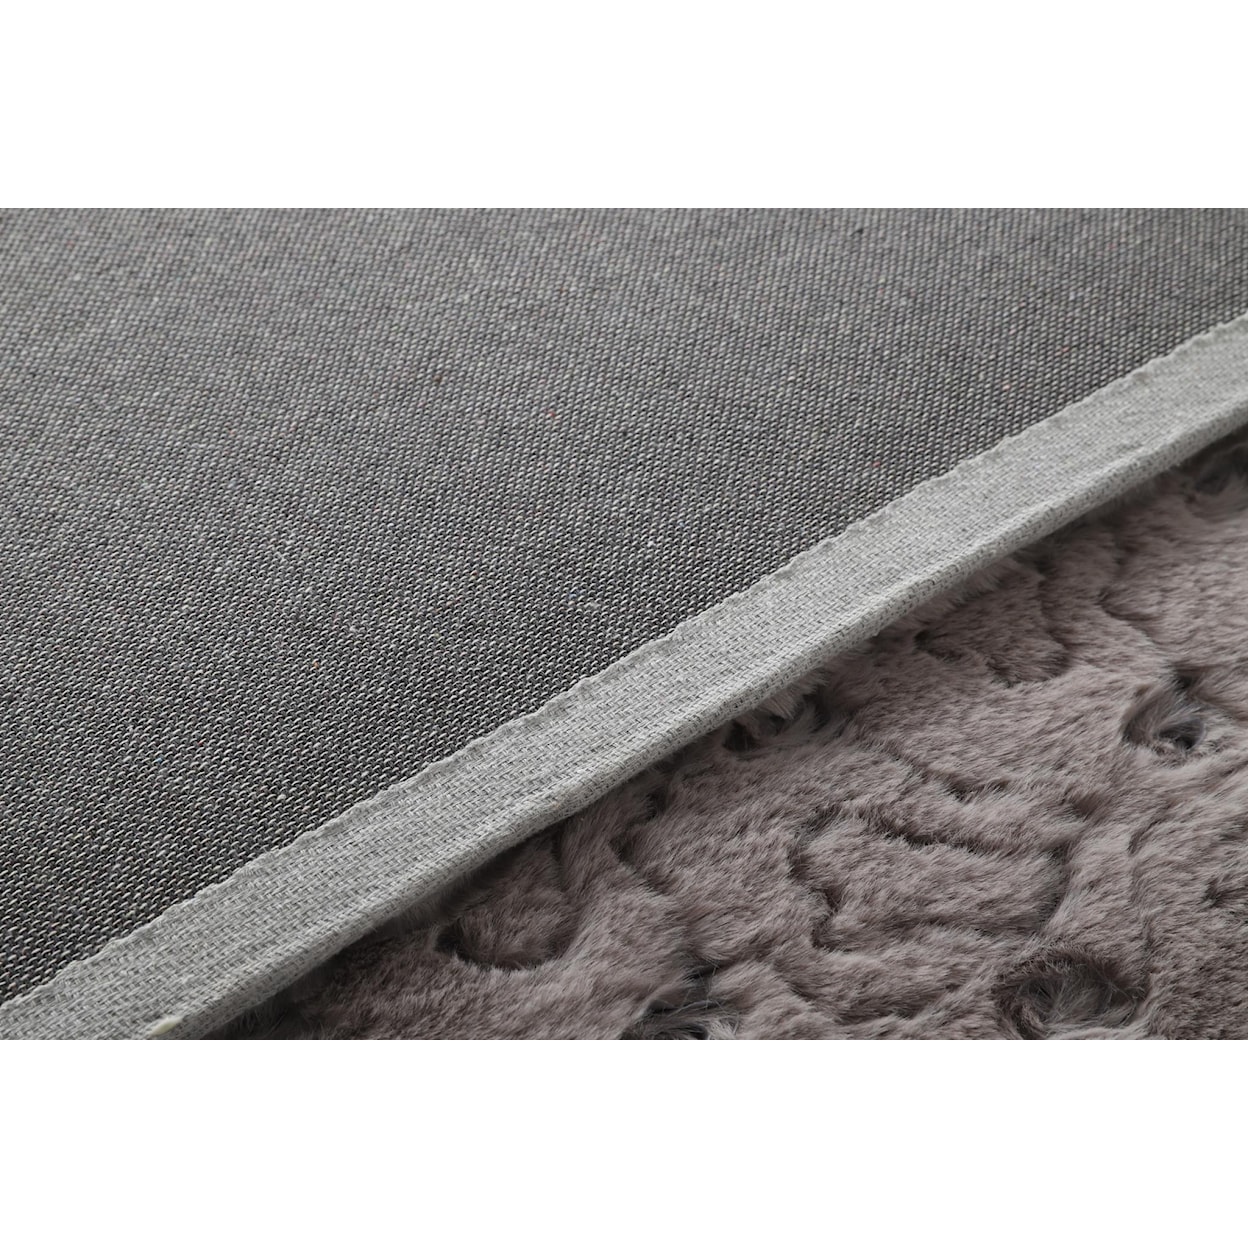 MDA Rugs Amore Collection AMORE 5X7 PATTERN GREY AREA RUG |